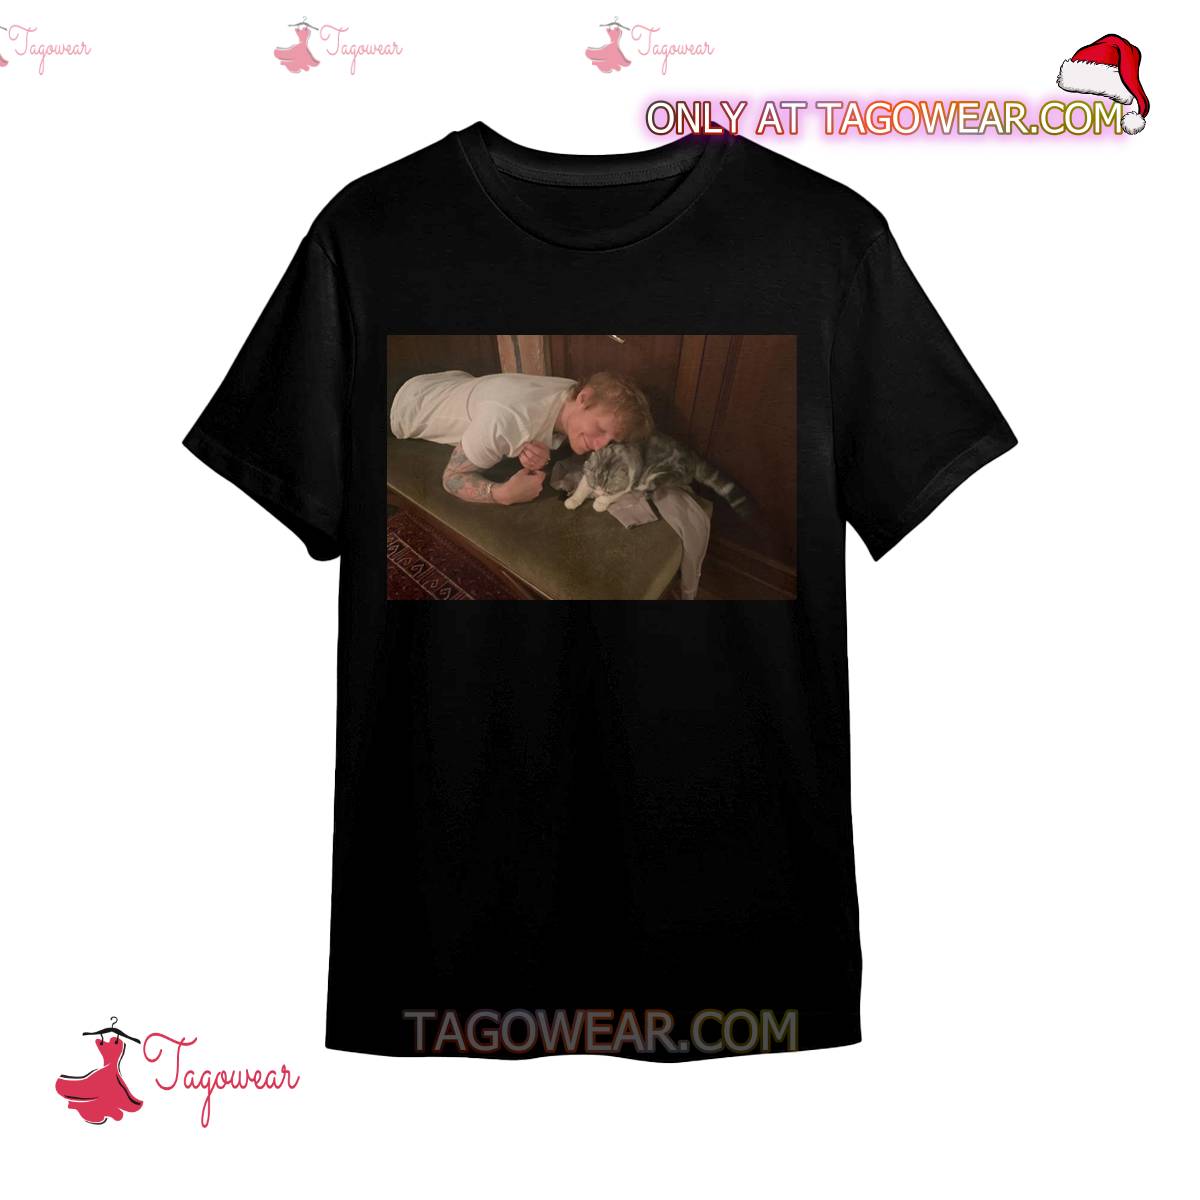 Taylor Swift's Cat Meredith With Ed Sheeran In New Photo Shirt